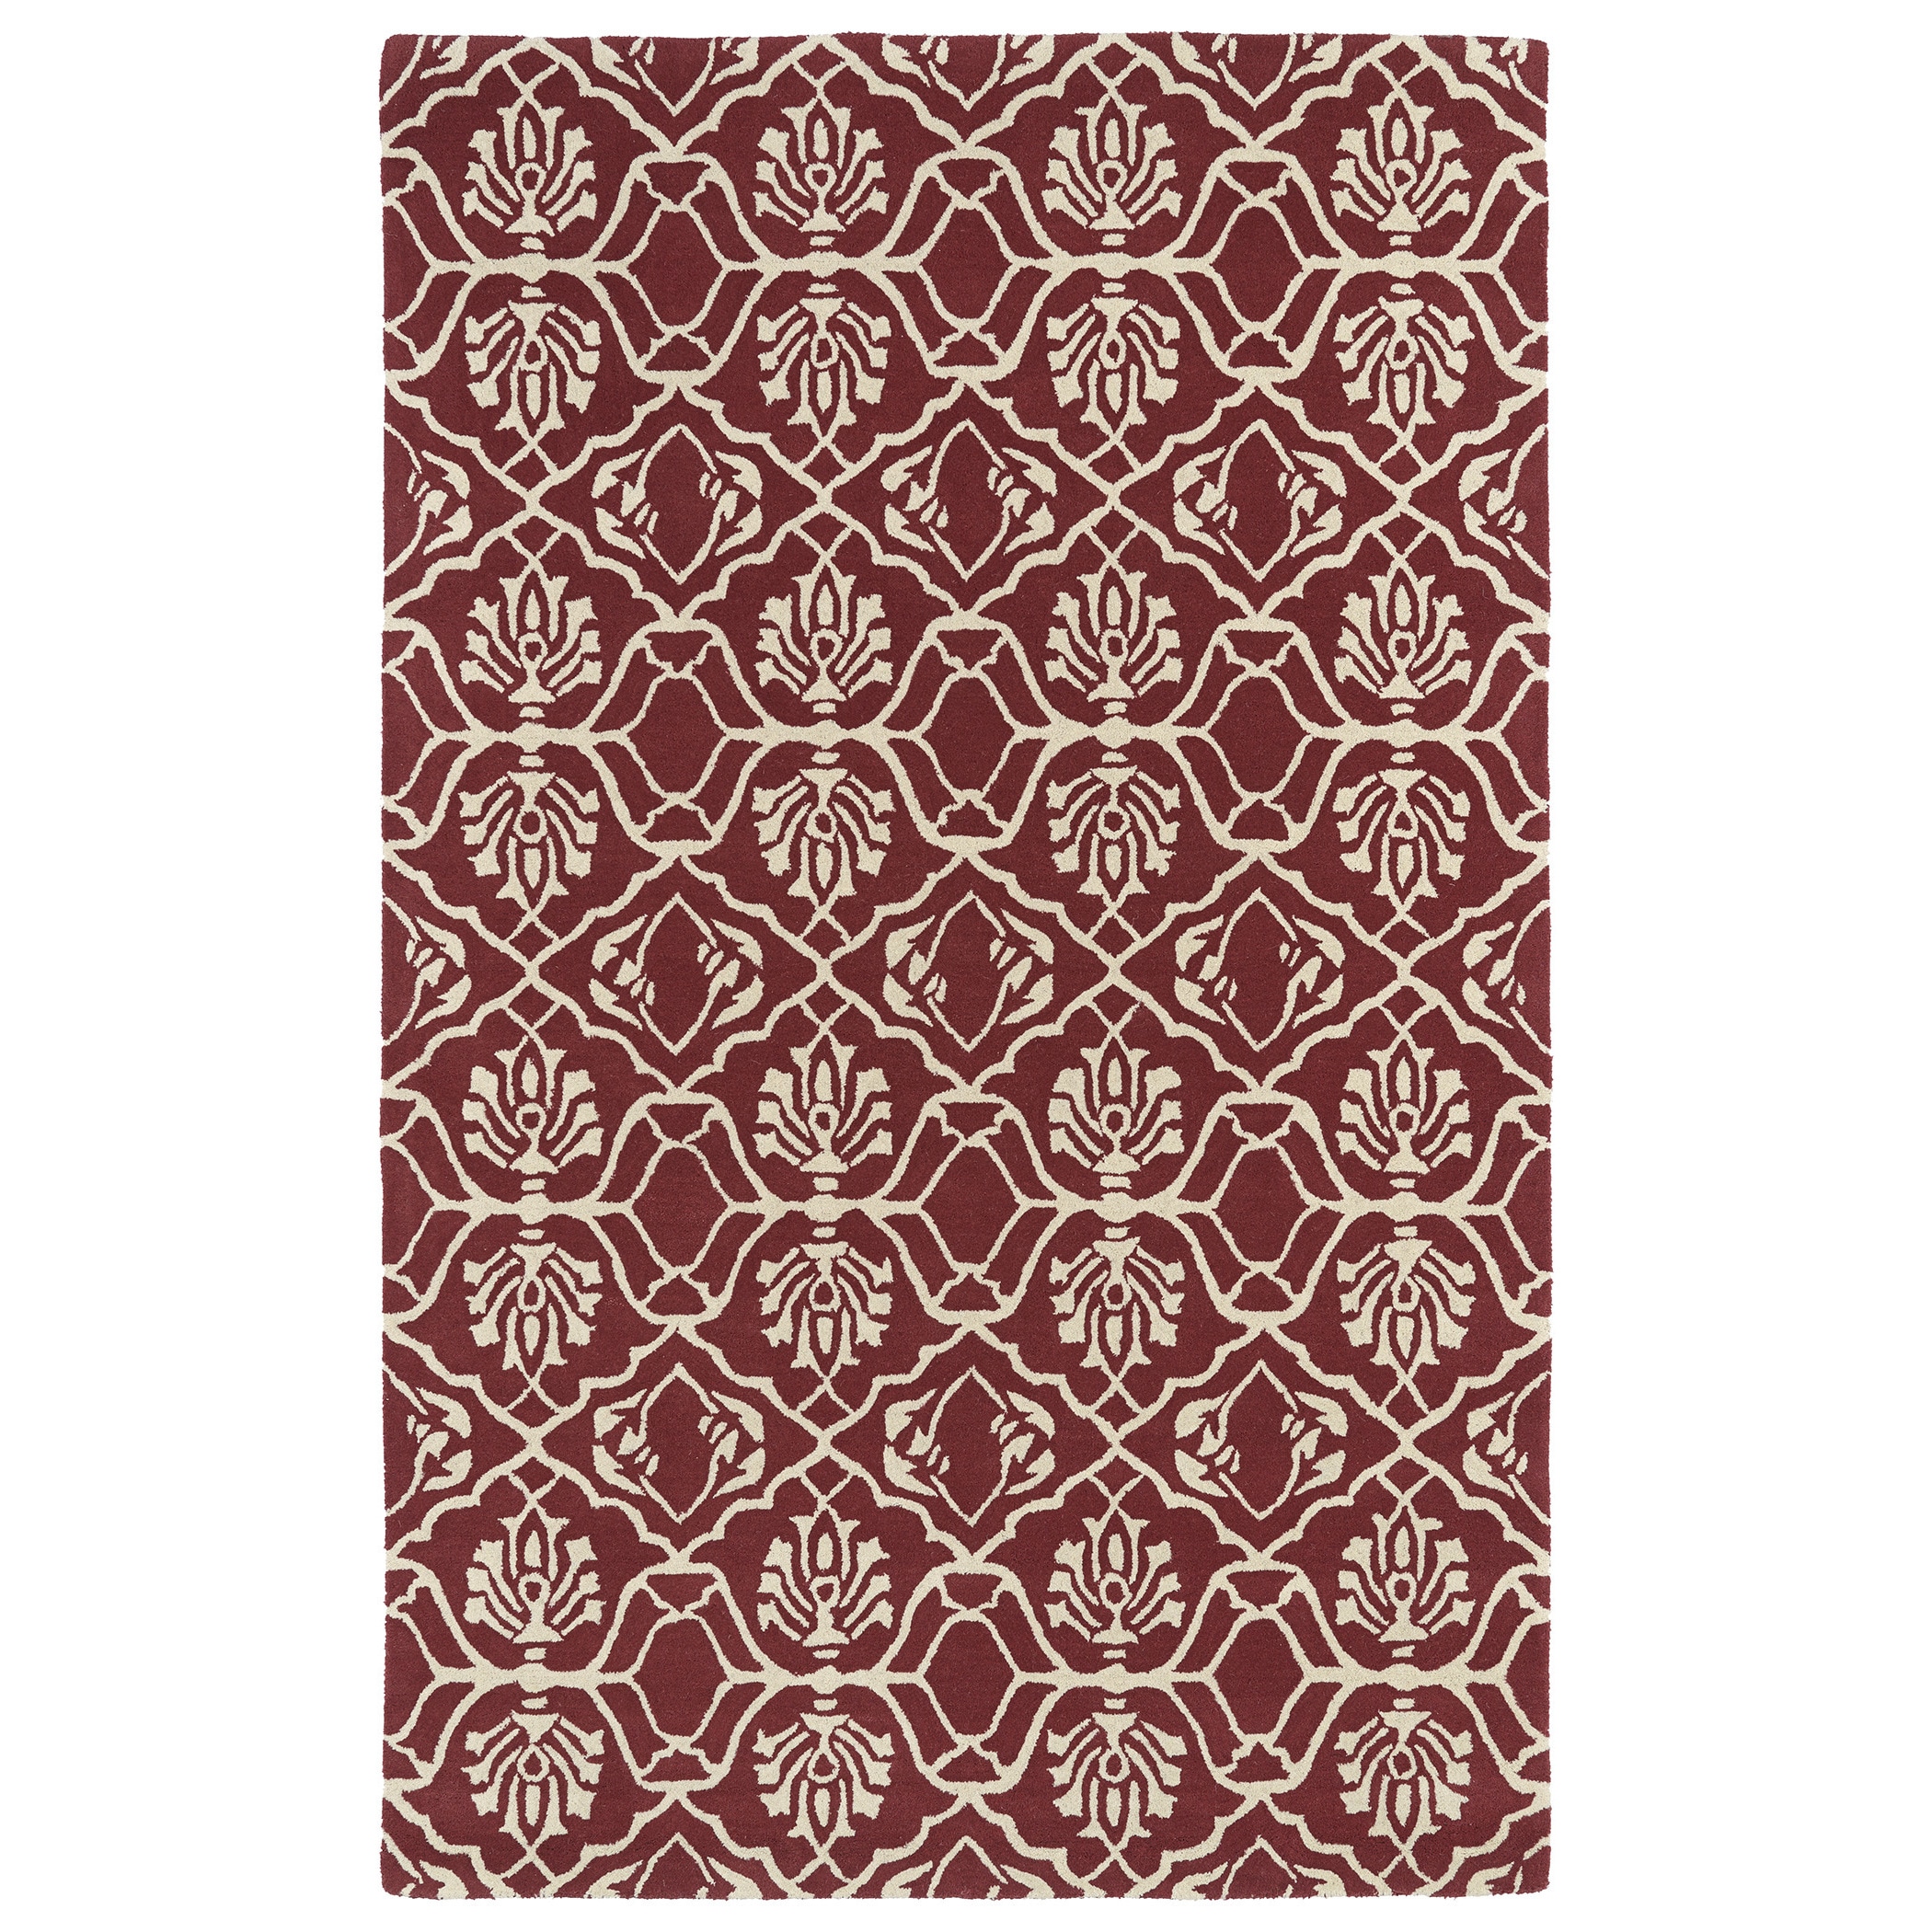 Kaleen Rugs Hand tufted Runway Berry/ Ivory Wool Rug (8 X 11) Ivory Size 8 x 10